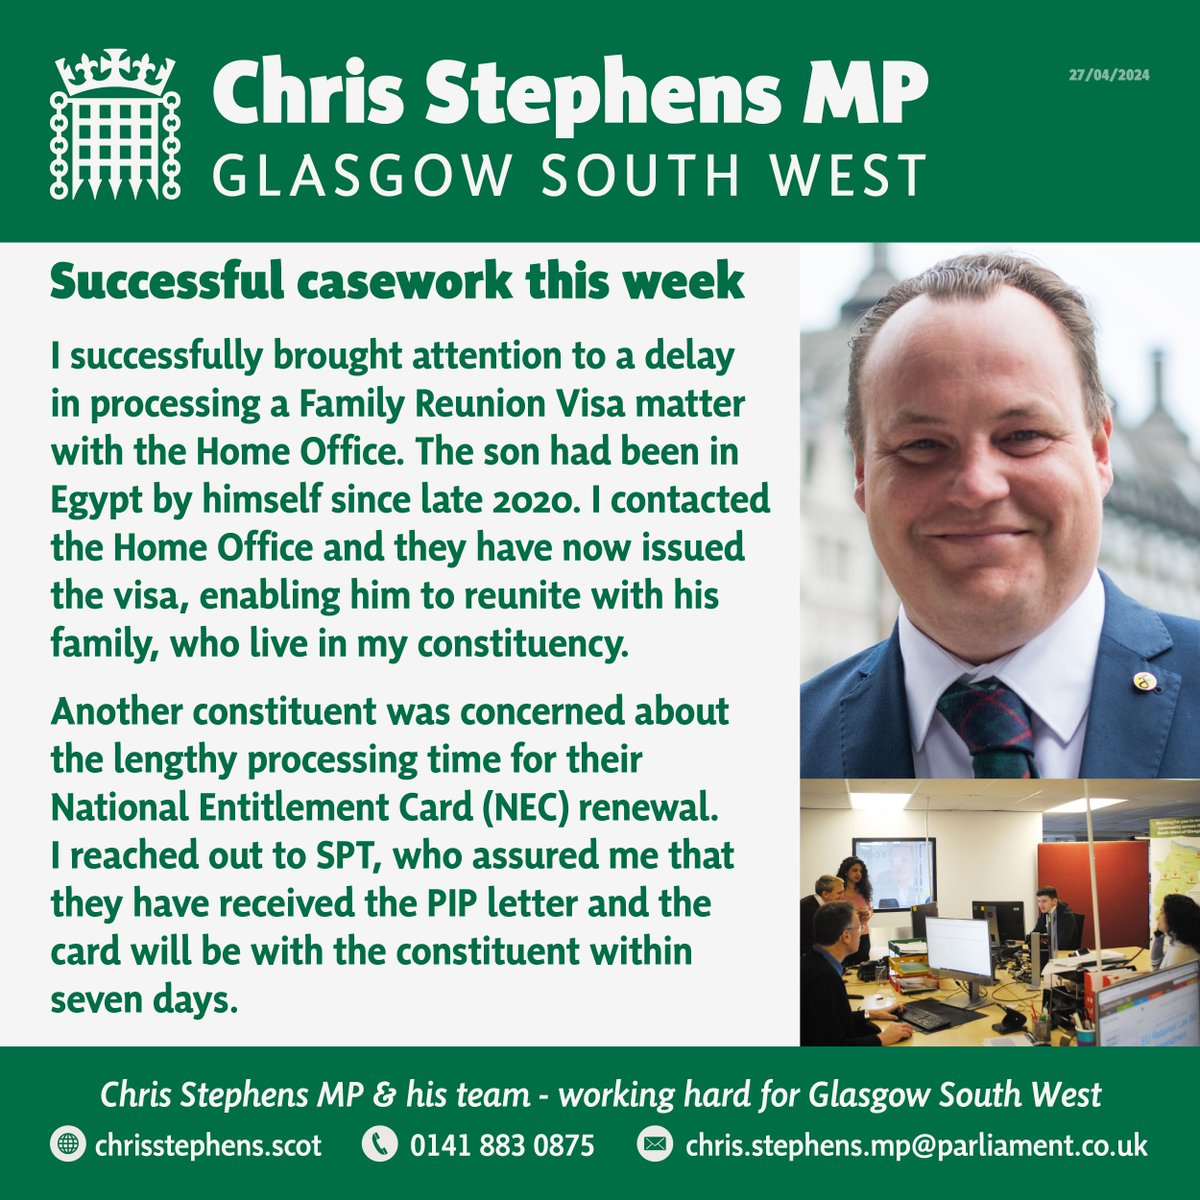 I am pleased to share the achievements of this week! 🌟🗓️ If you need any help, feel free to reach out to my office. You can schedule a meeting during my regular office hours by getting in touch with my team at 0141 883 0875. #GlasgowSouthWest #SNP